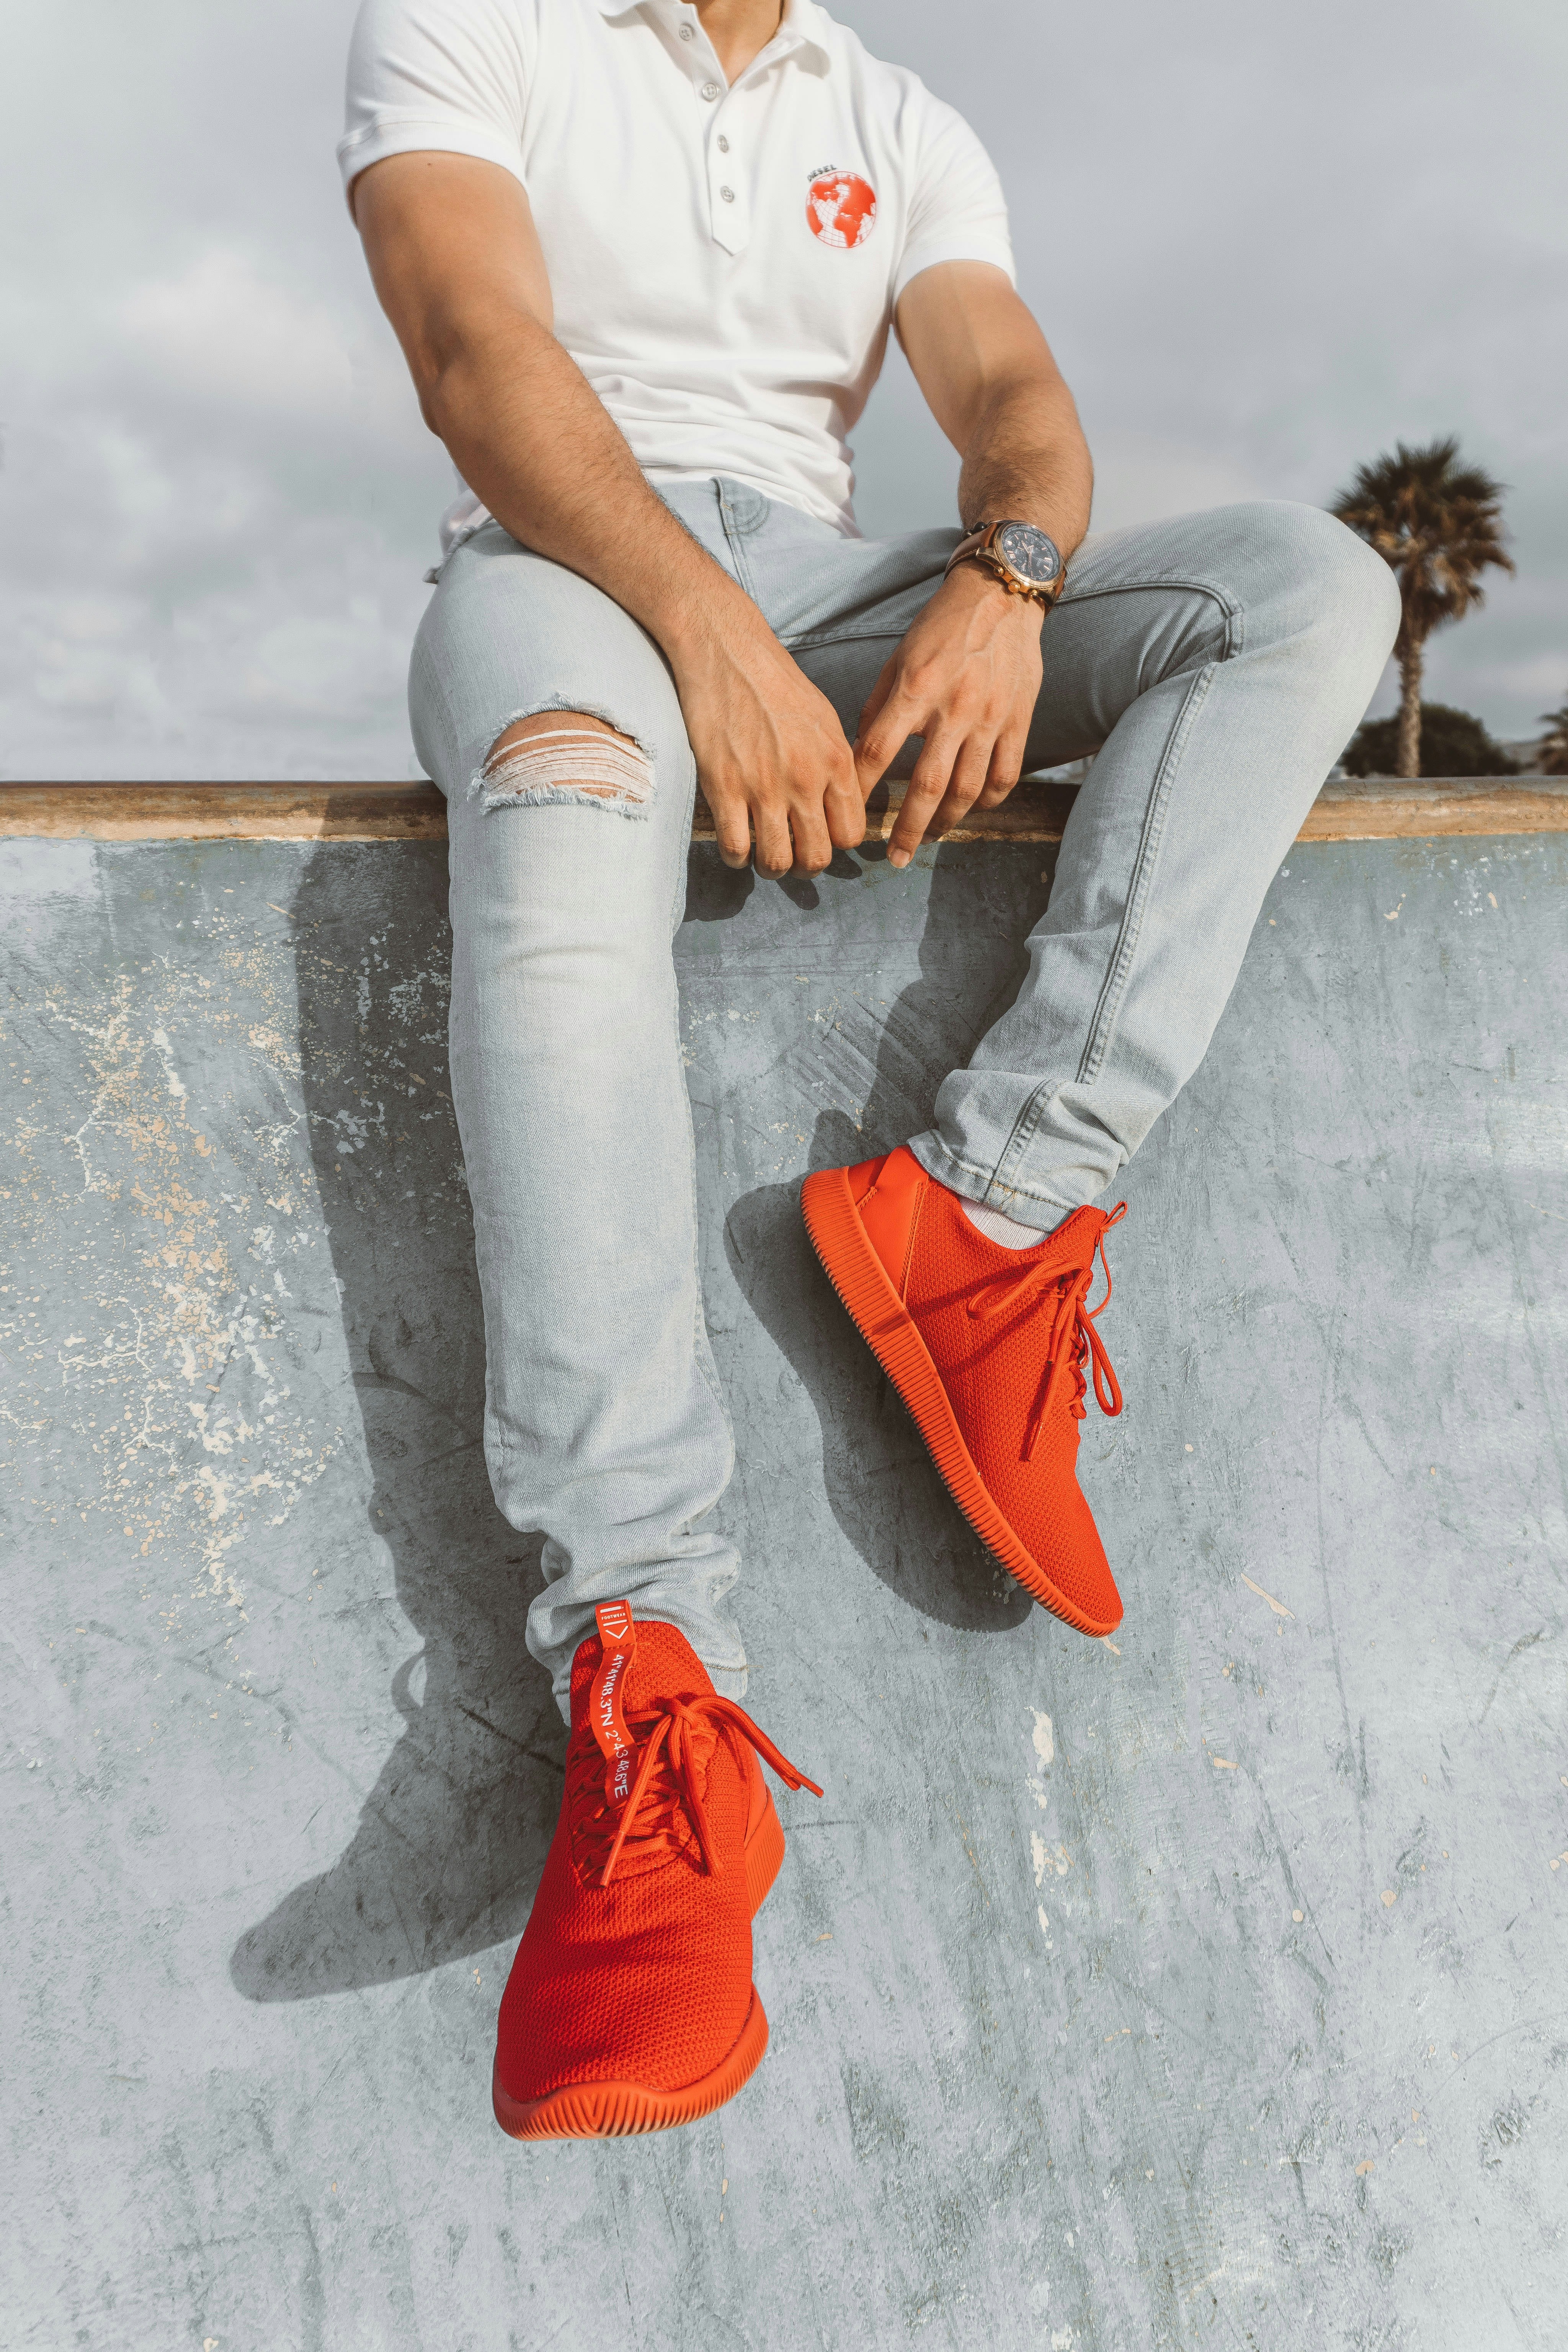 red sneakers and jeans